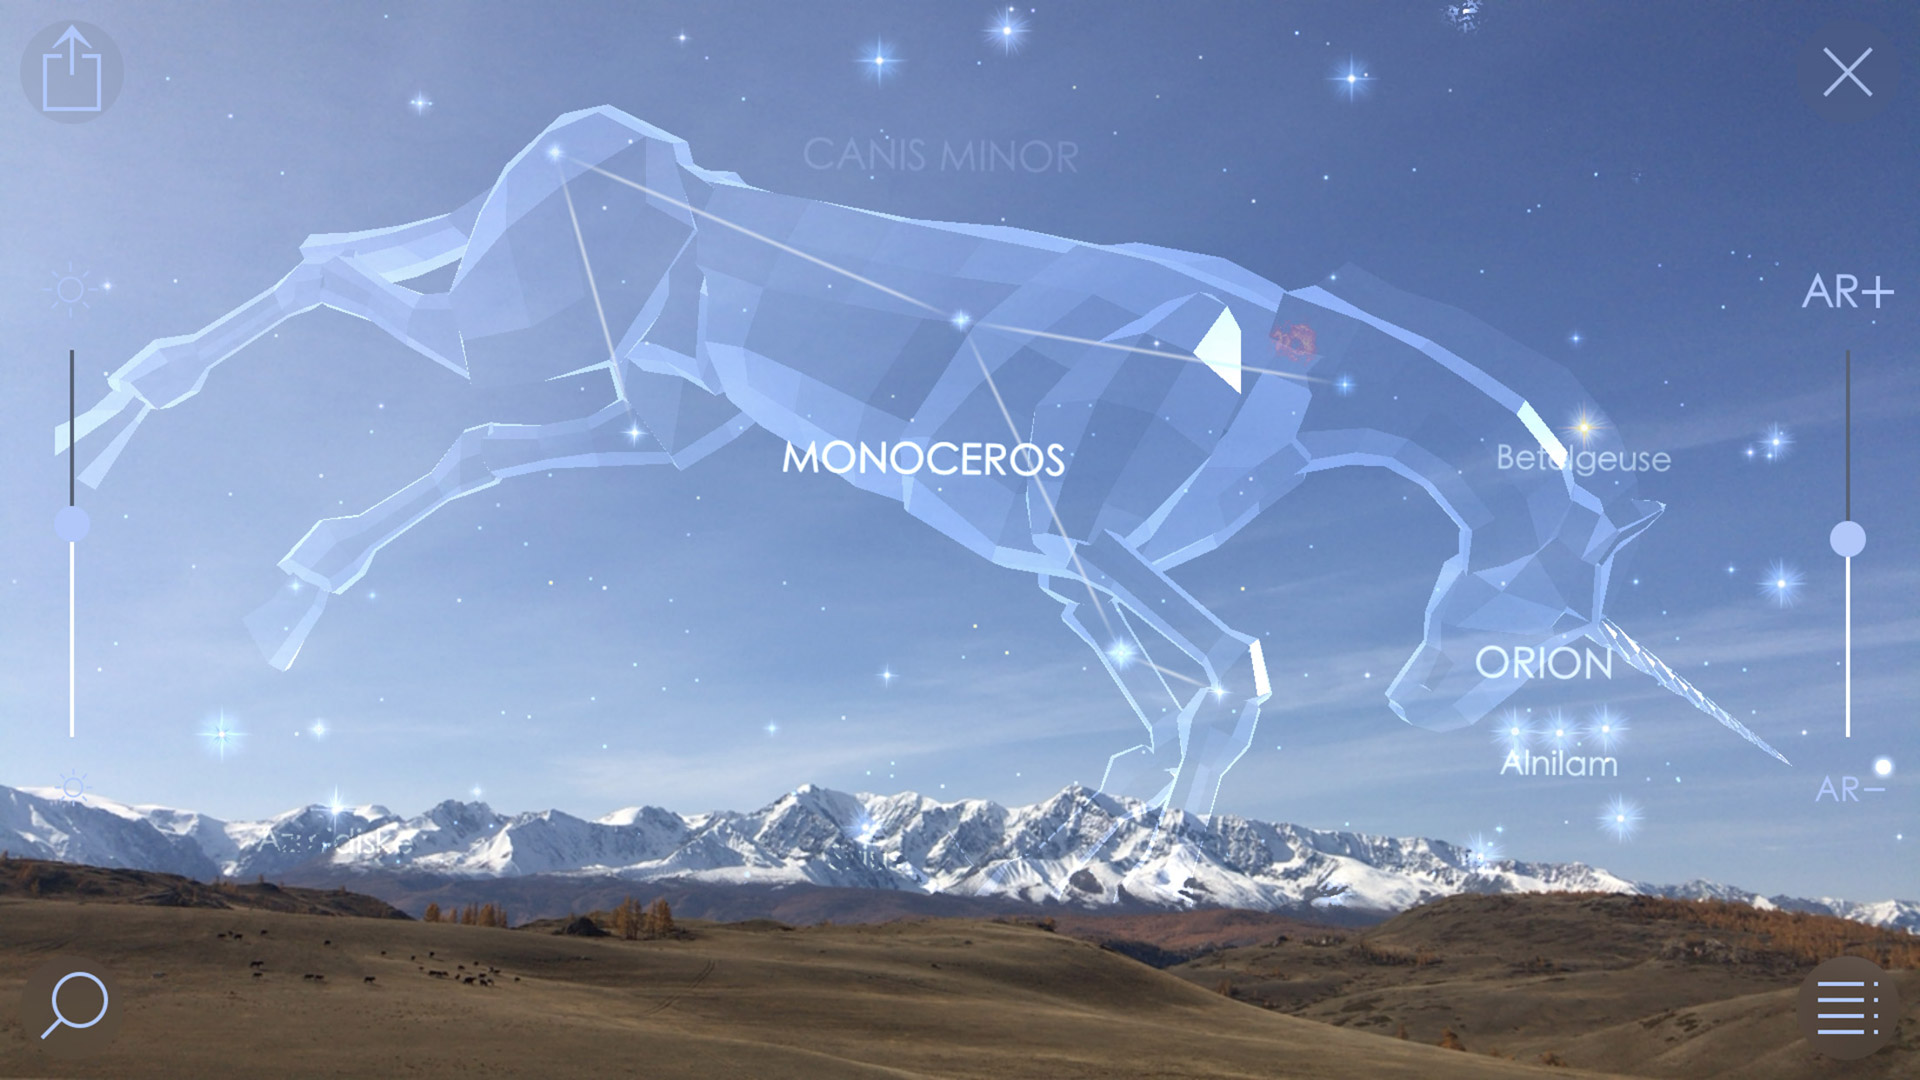 Screenshot from Star Walk 2 app on iPad, showing the constellation monoceros overlaid on an augmented reality background of mountains